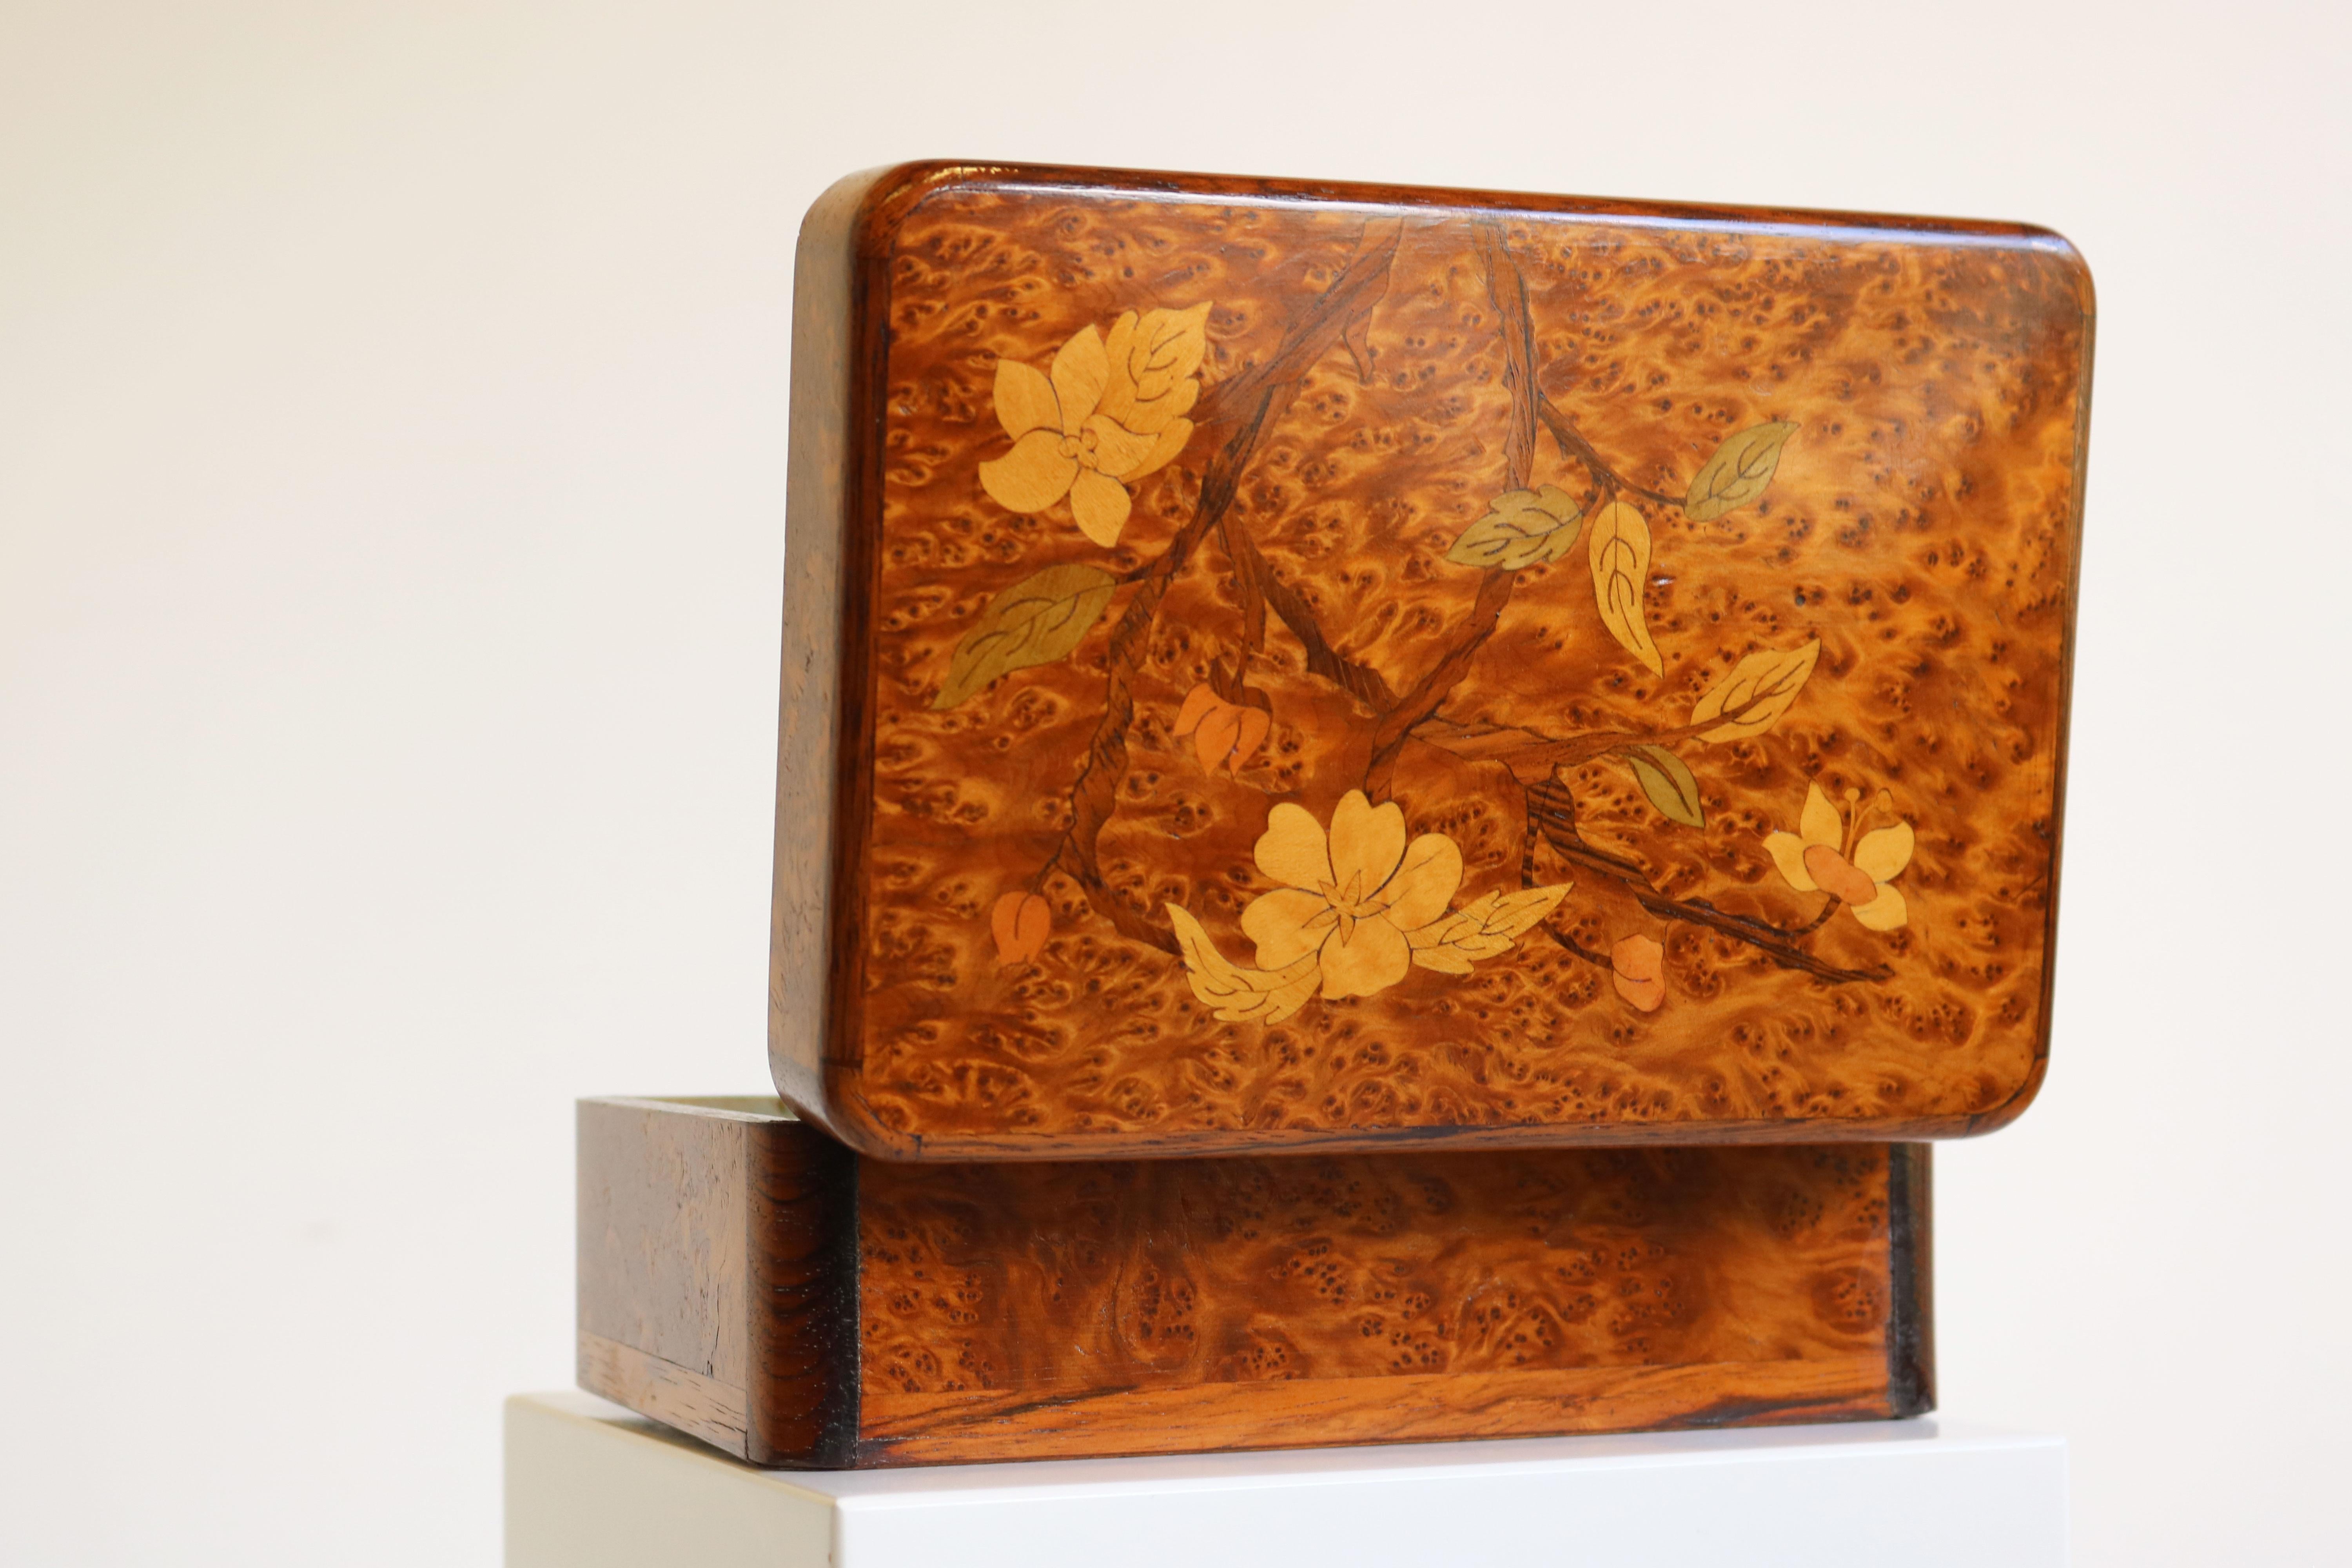 Antique French Art Nouveau / Jugendstil Jewelry Box in Burl Wood & Floral Inlay 4